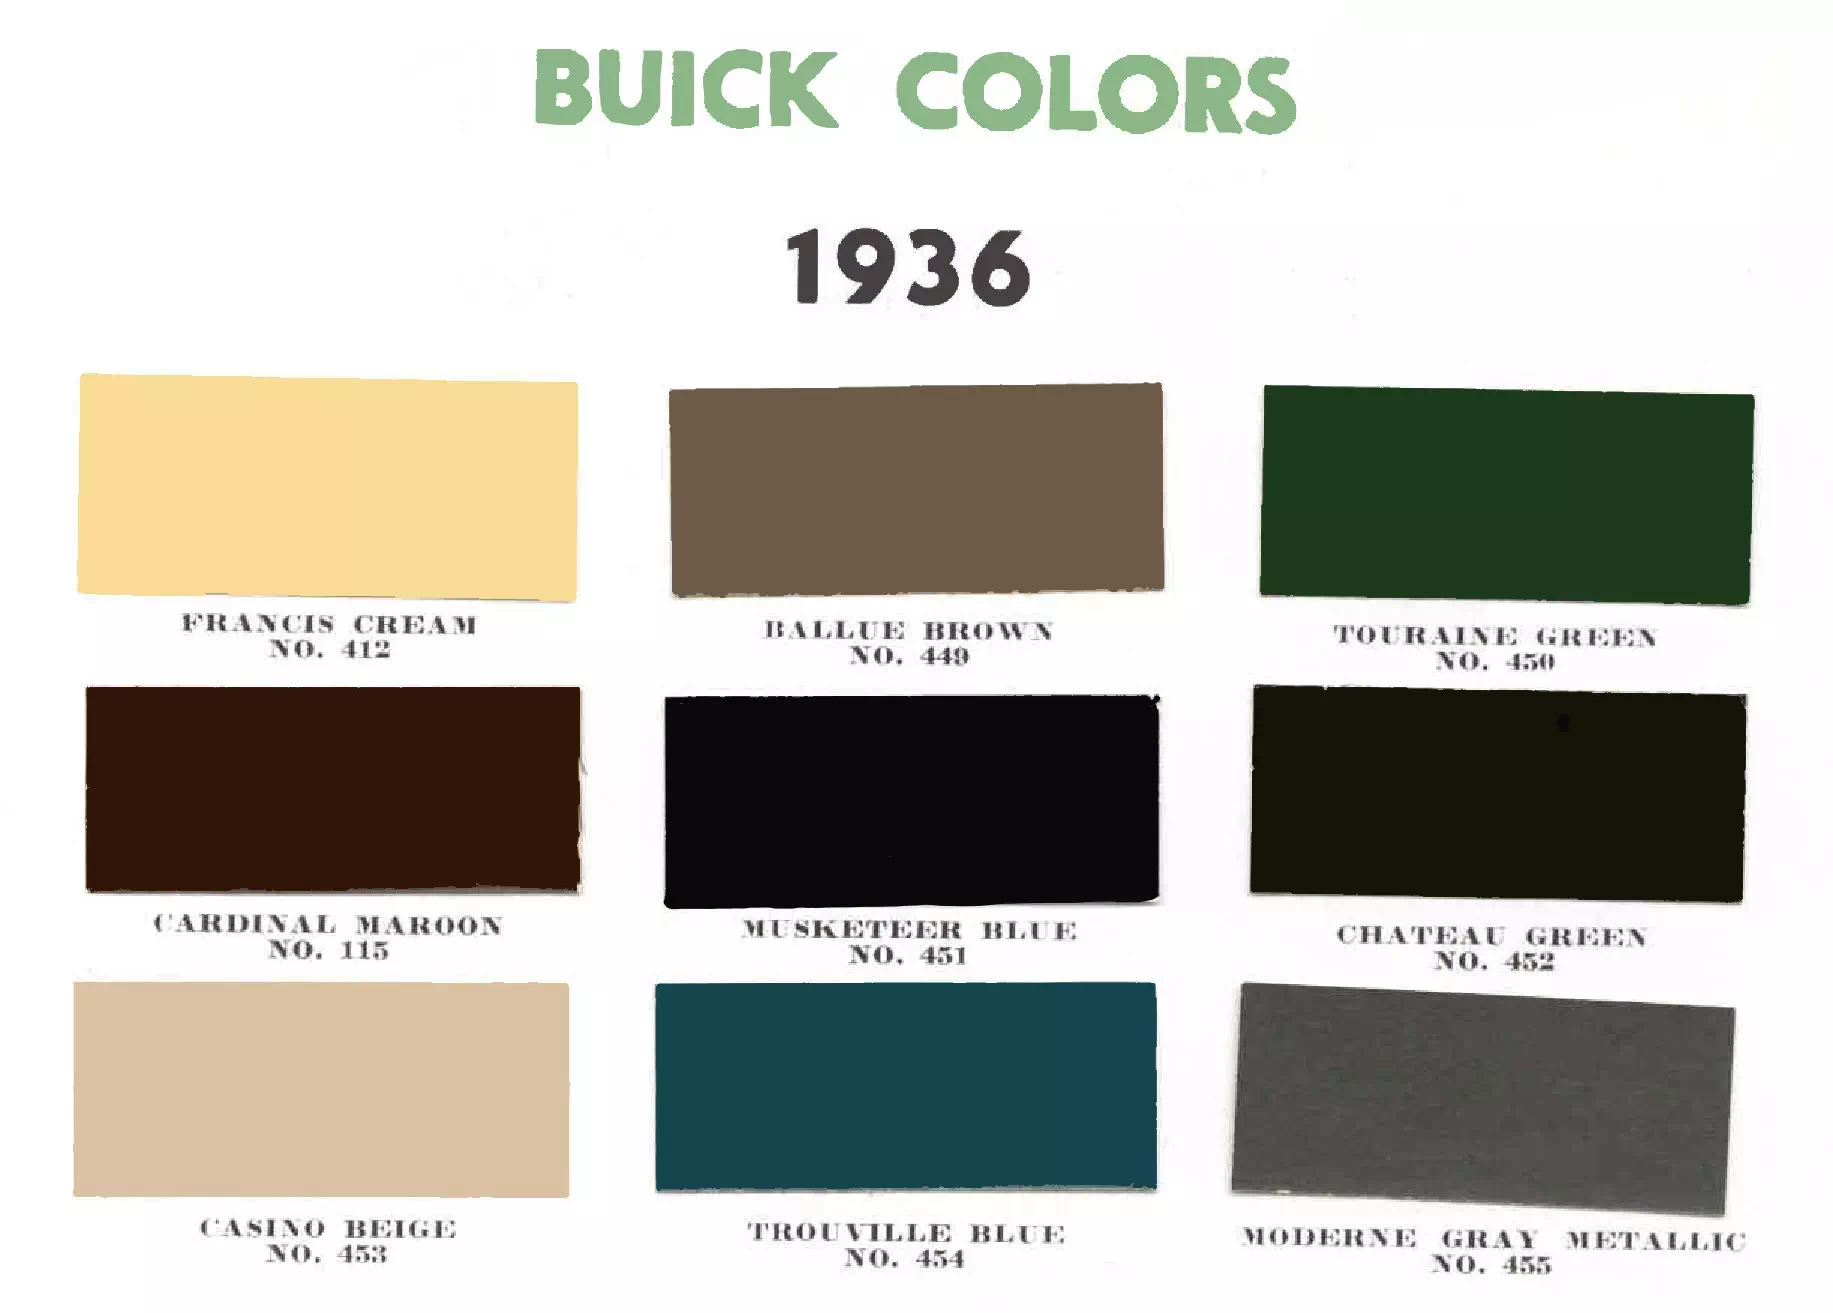 Paint Codes and Paint Colors used on the exterior of 1936 Buick Vehicles